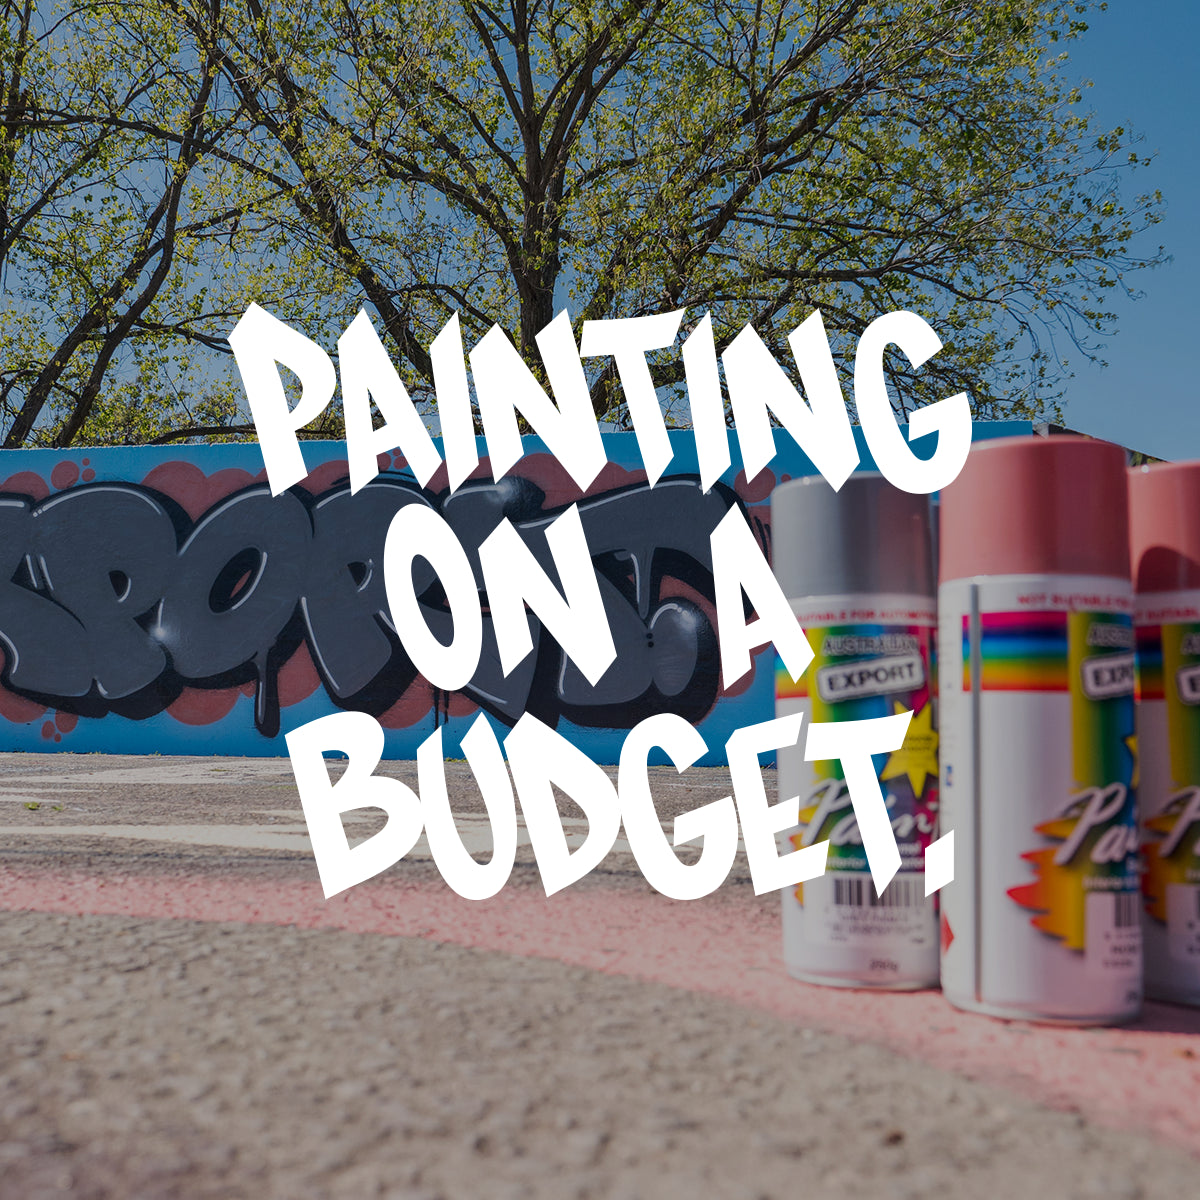 VIDEO - PAINTING ON A BUDGET